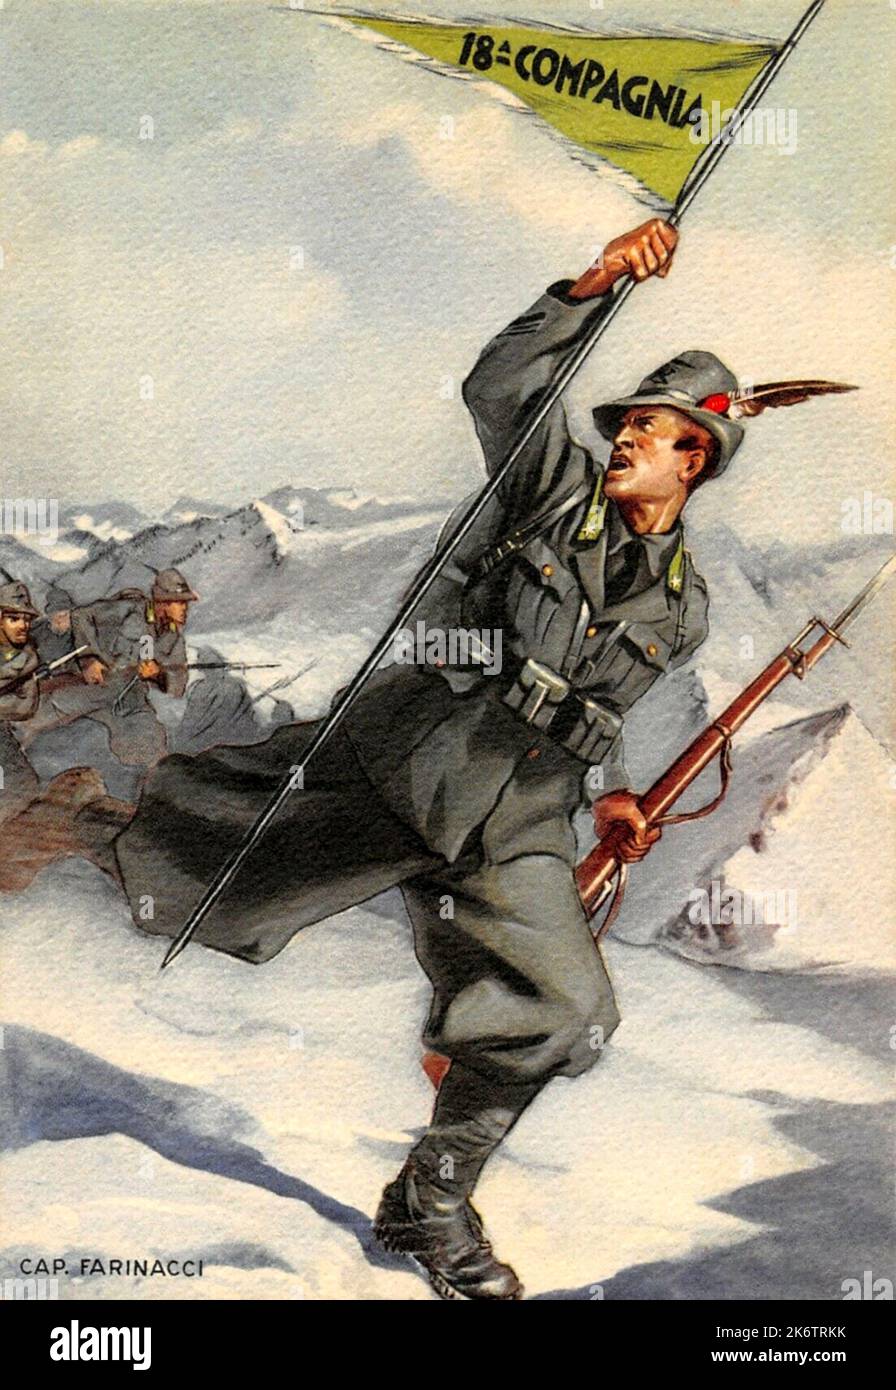 1940's ca , ITALY : A postcard italian military ALPINI soldiers ( of 18 ma COMPAGNIA ) with Captain ARMANDO FARINACCI ( brotheer of fascist criminal Roberto Farinacci the Ras of Cremona ) idealized during an assault in the snow mountain in WWII FASCIST years . During the period of fascist propaganda, the Alpine is represented as a Super Hero with great physical strength, exalting his tenacity, unshakable faith in the cause and sacrifice.  Artwork by unknown illustrator . - ALPINO - ALPINE - ALPINI - CARTOLINA POSTALE - SECONDA  GUERRA MONDIALE - Second World War 2nd  - miliari soldati italiani Stock Photo